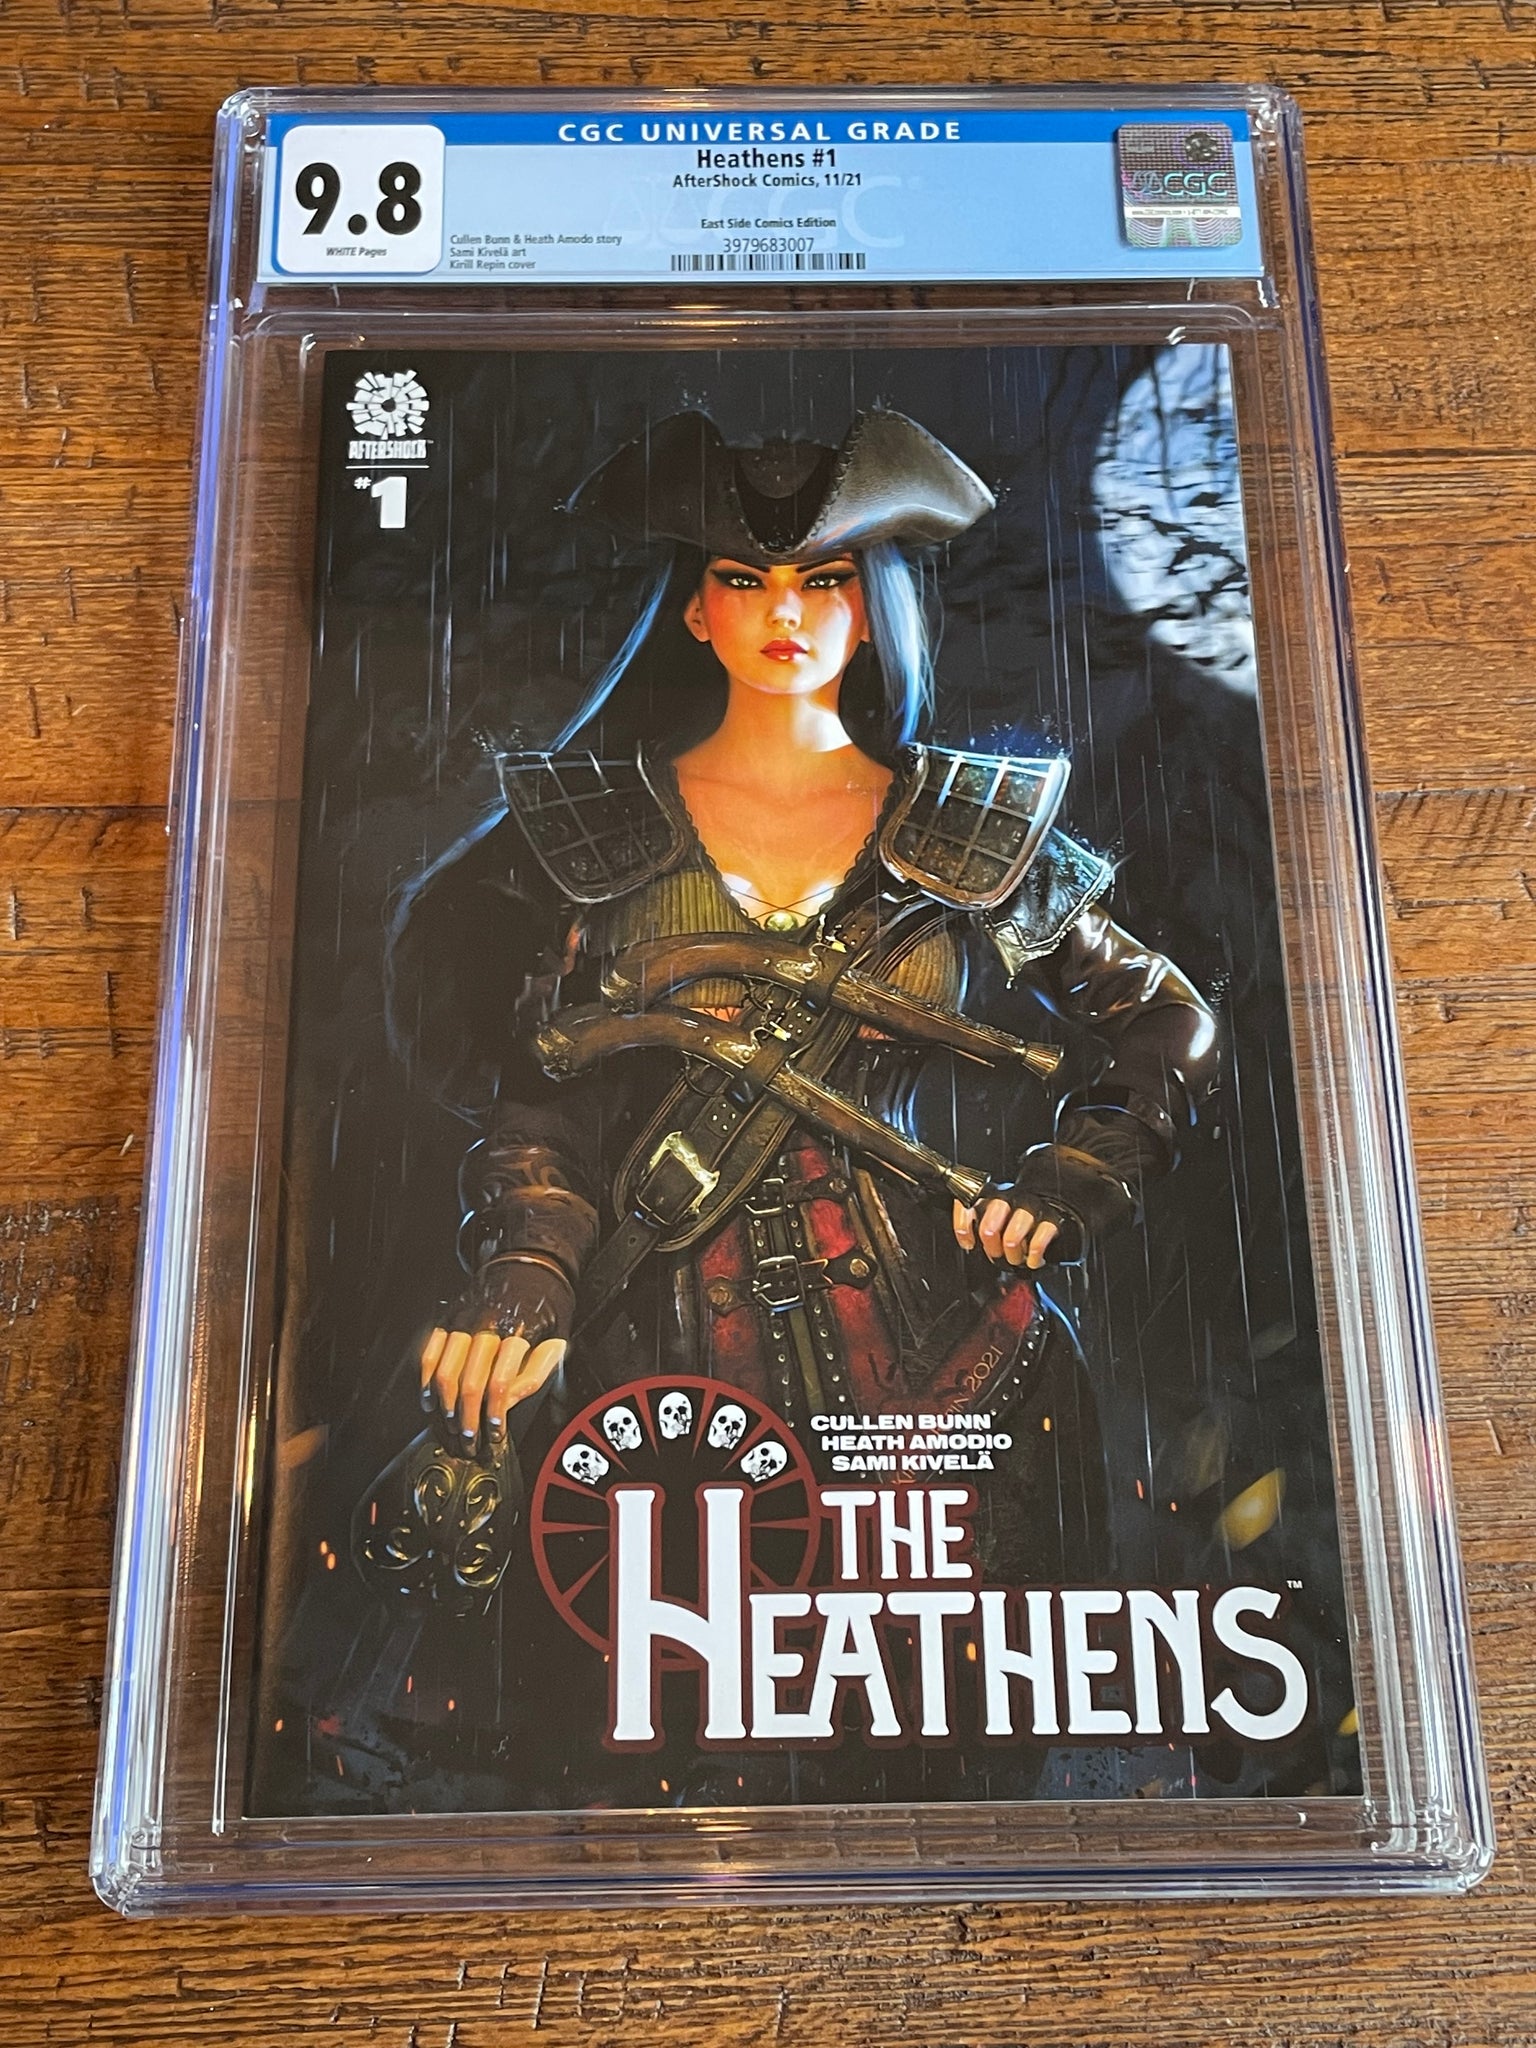 THE HEATHENS #1 CGC 9.8 KIRILL REPIN EXCLUSIVE TRADE DRESS VARIANT-A